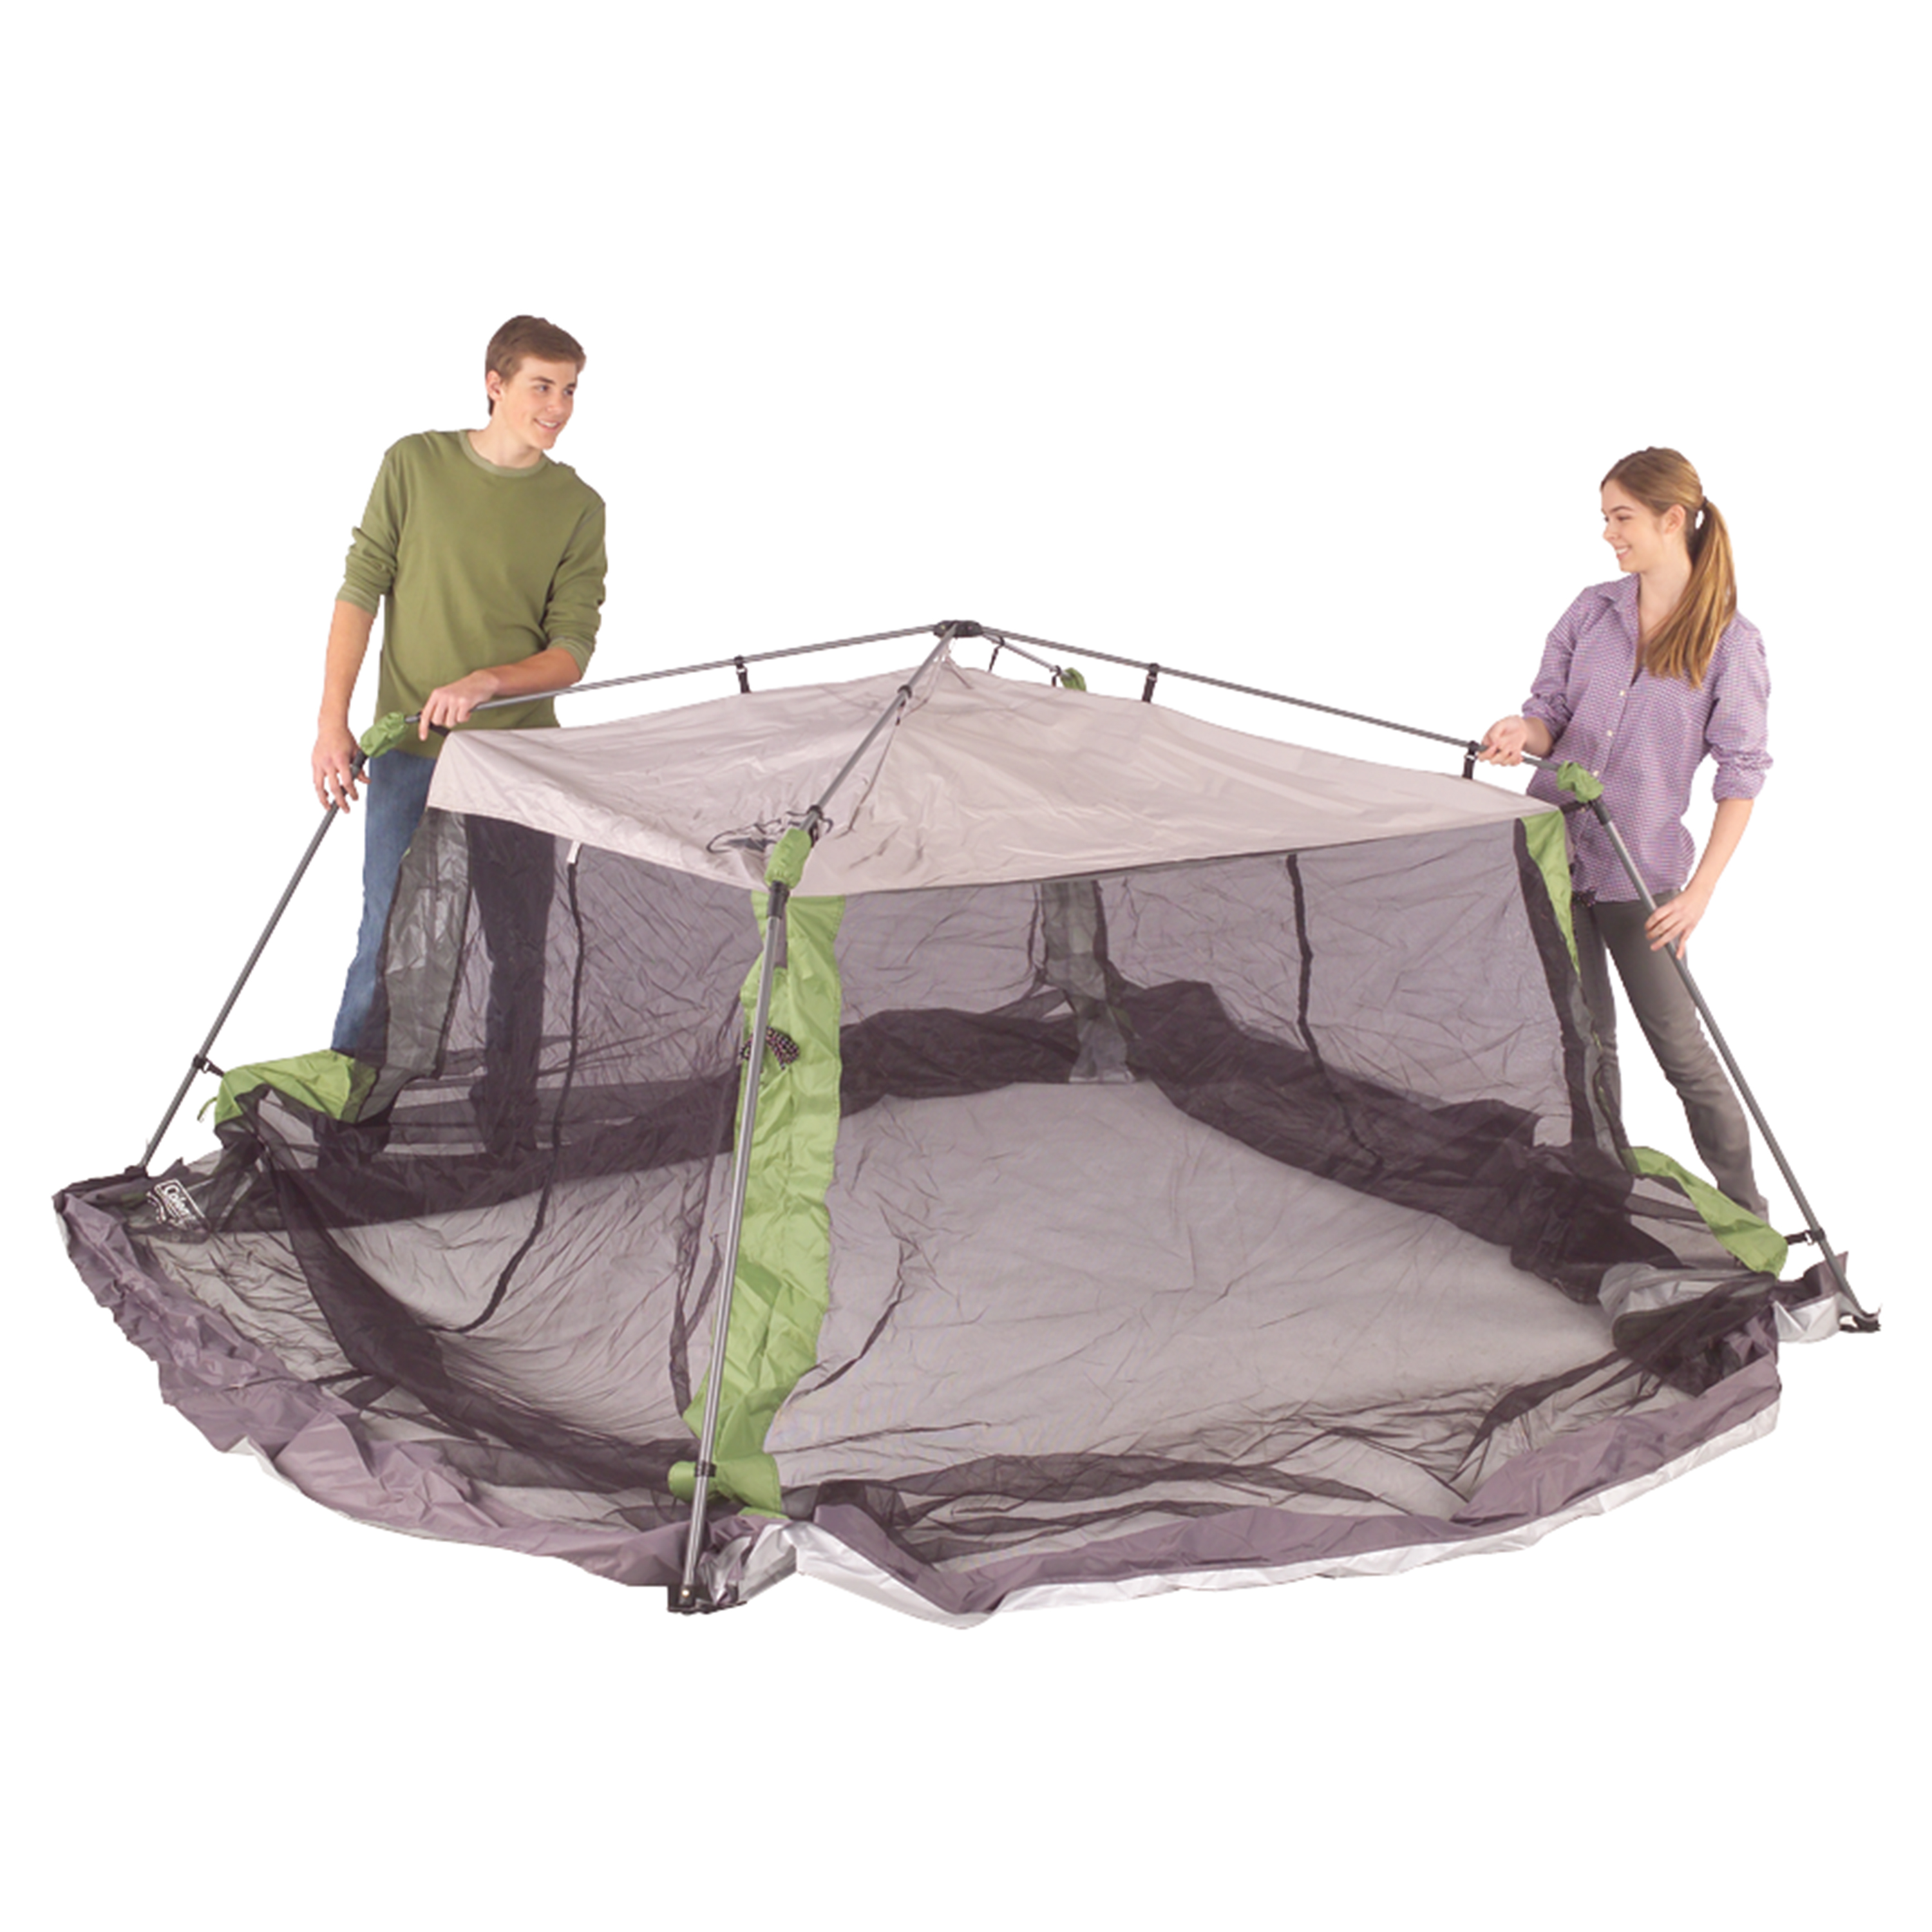 Coleman 10'x10' Slant Leg Instant Canopy Screen House (100 Sq. ft Coverage) - image 3 of 6